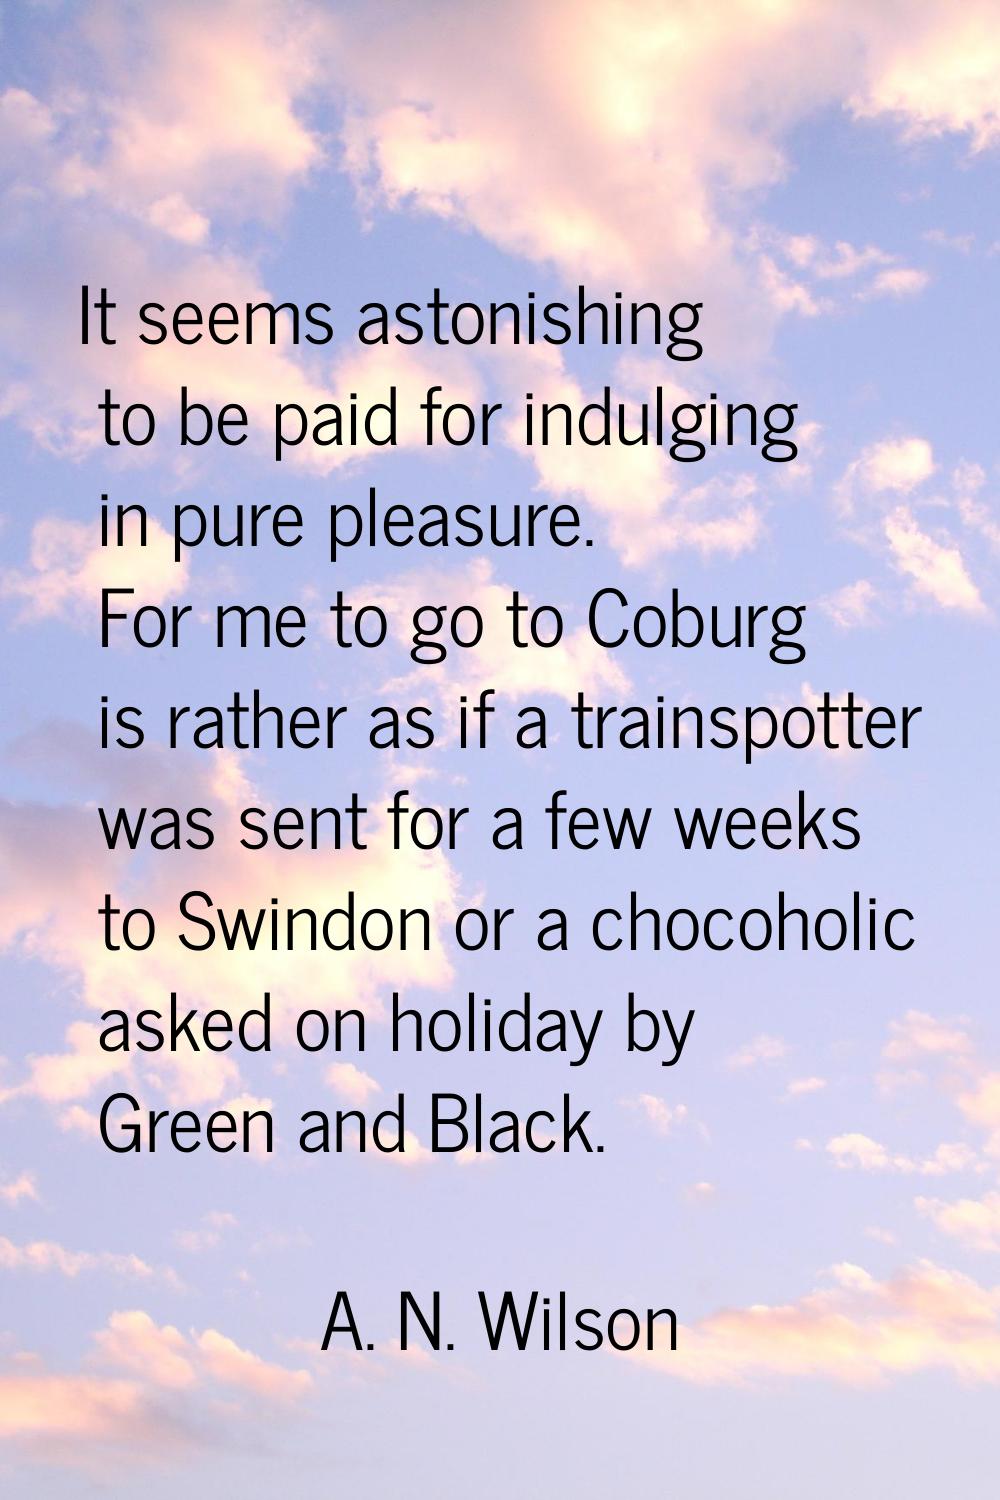 It seems astonishing to be paid for indulging in pure pleasure. For me to go to Coburg is rather as